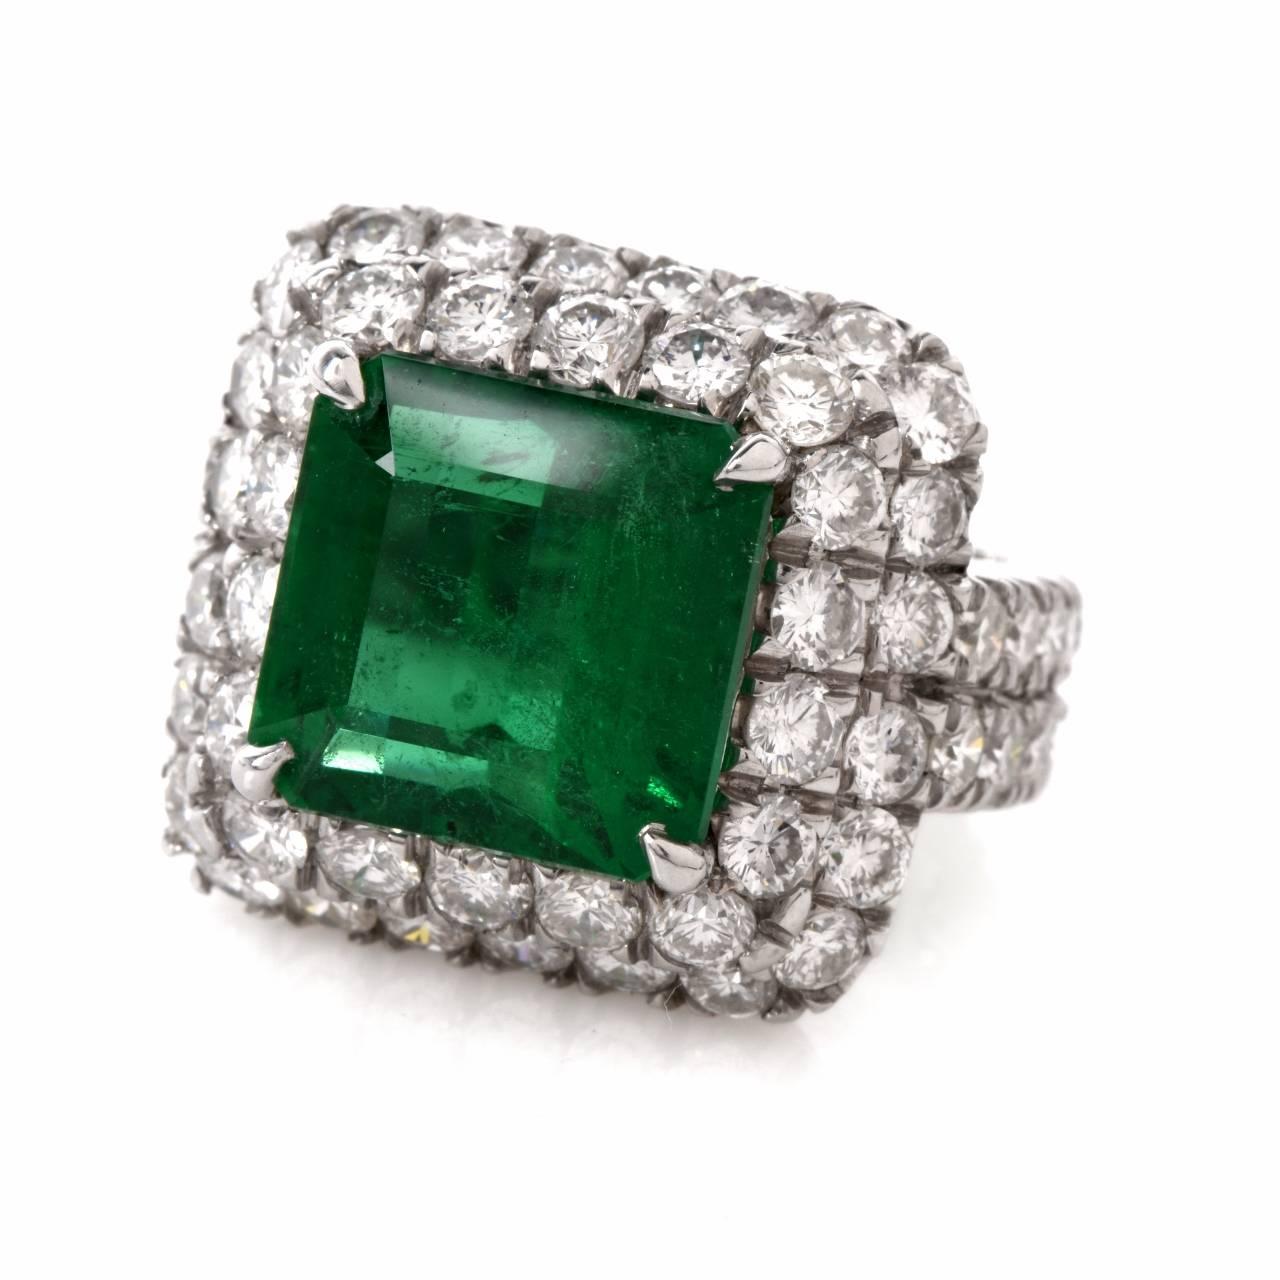 This beautiful estate engagement ring is crafted in solid platinum. The center exposes a gorgeous extremely high quality genuine vibrant green square emerald cut emerald of approx. 8.32ct, prong set (11.22mm x 11.77 x 8.7mm). Surrounded by 83 round